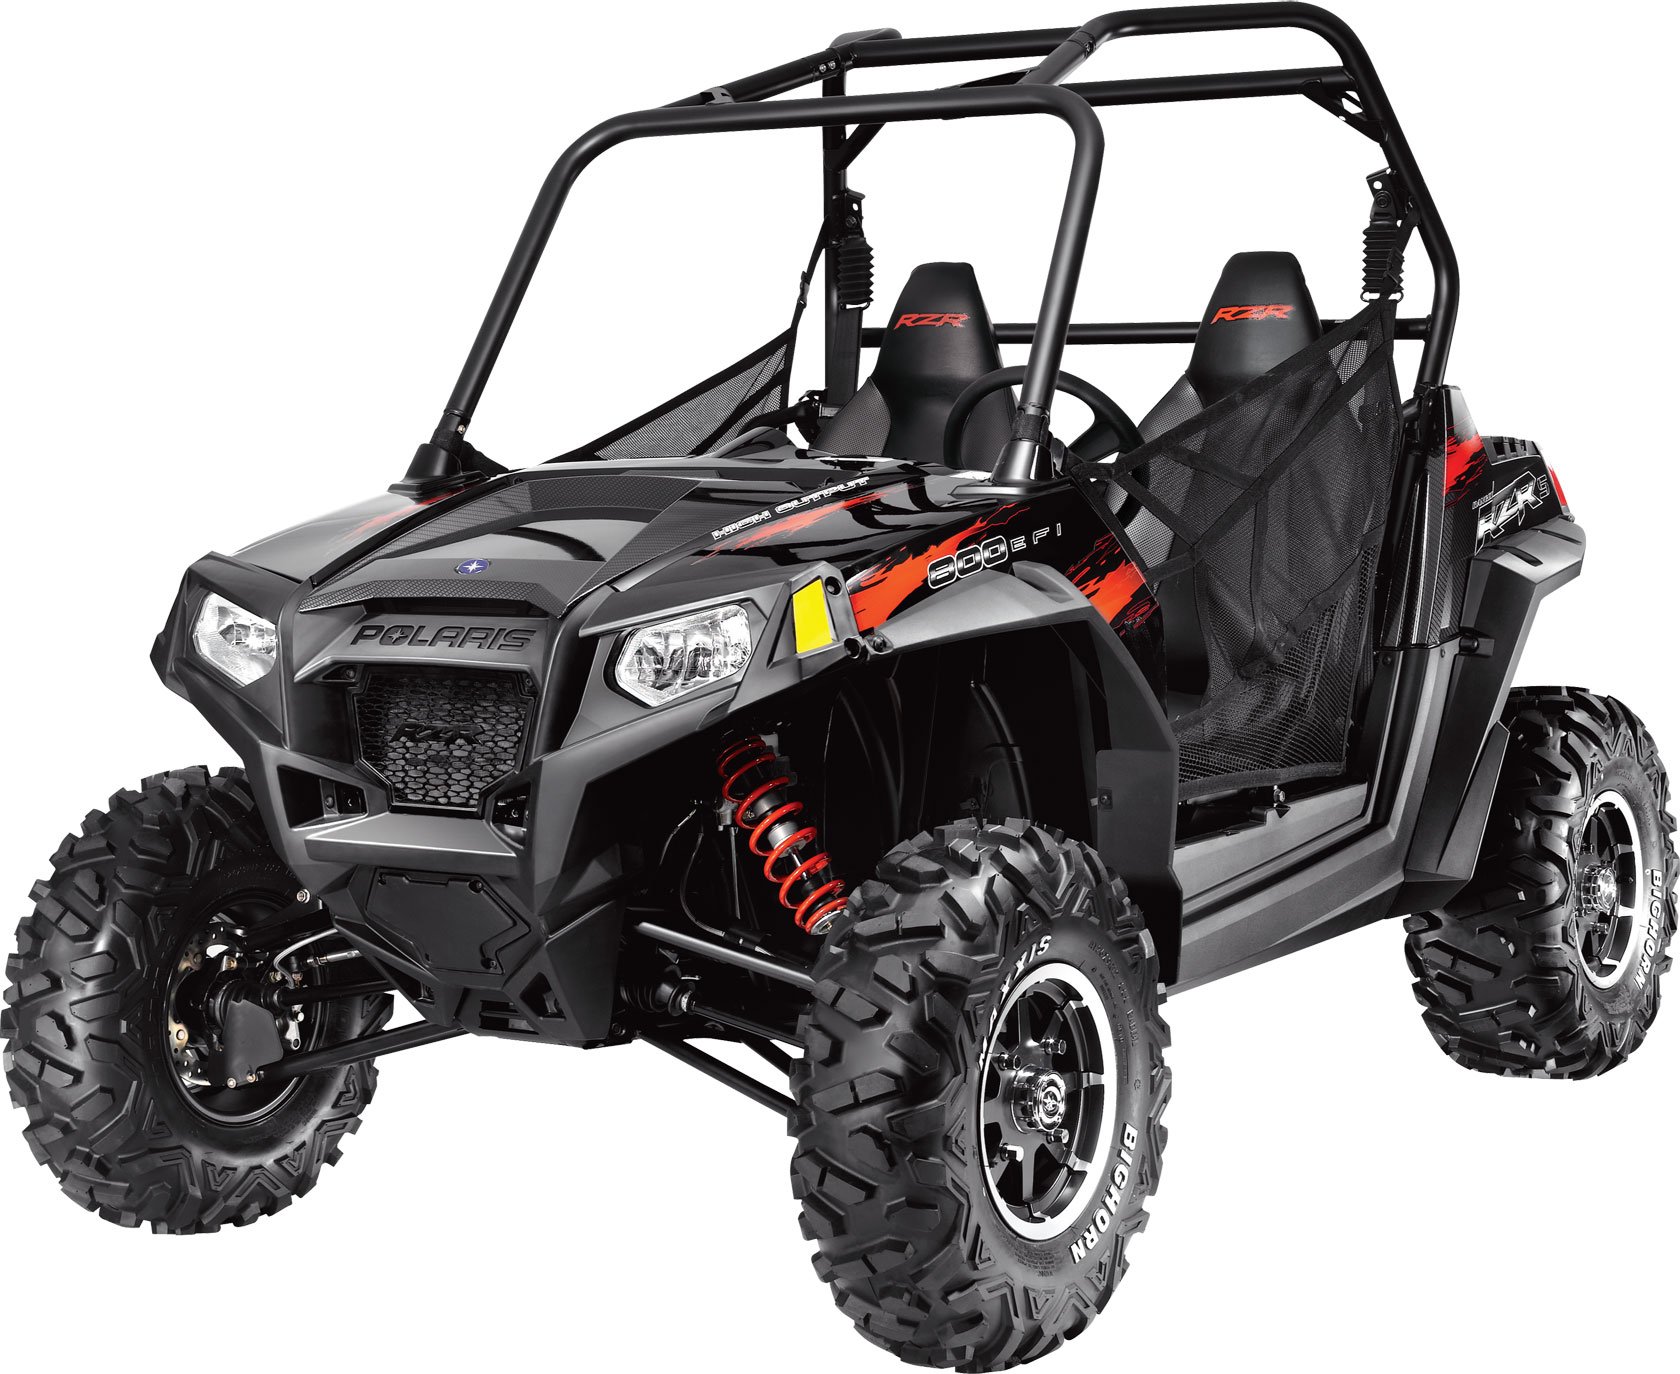 More information about "NEW RANGER RZR XP™ 900 OVERVIEW"